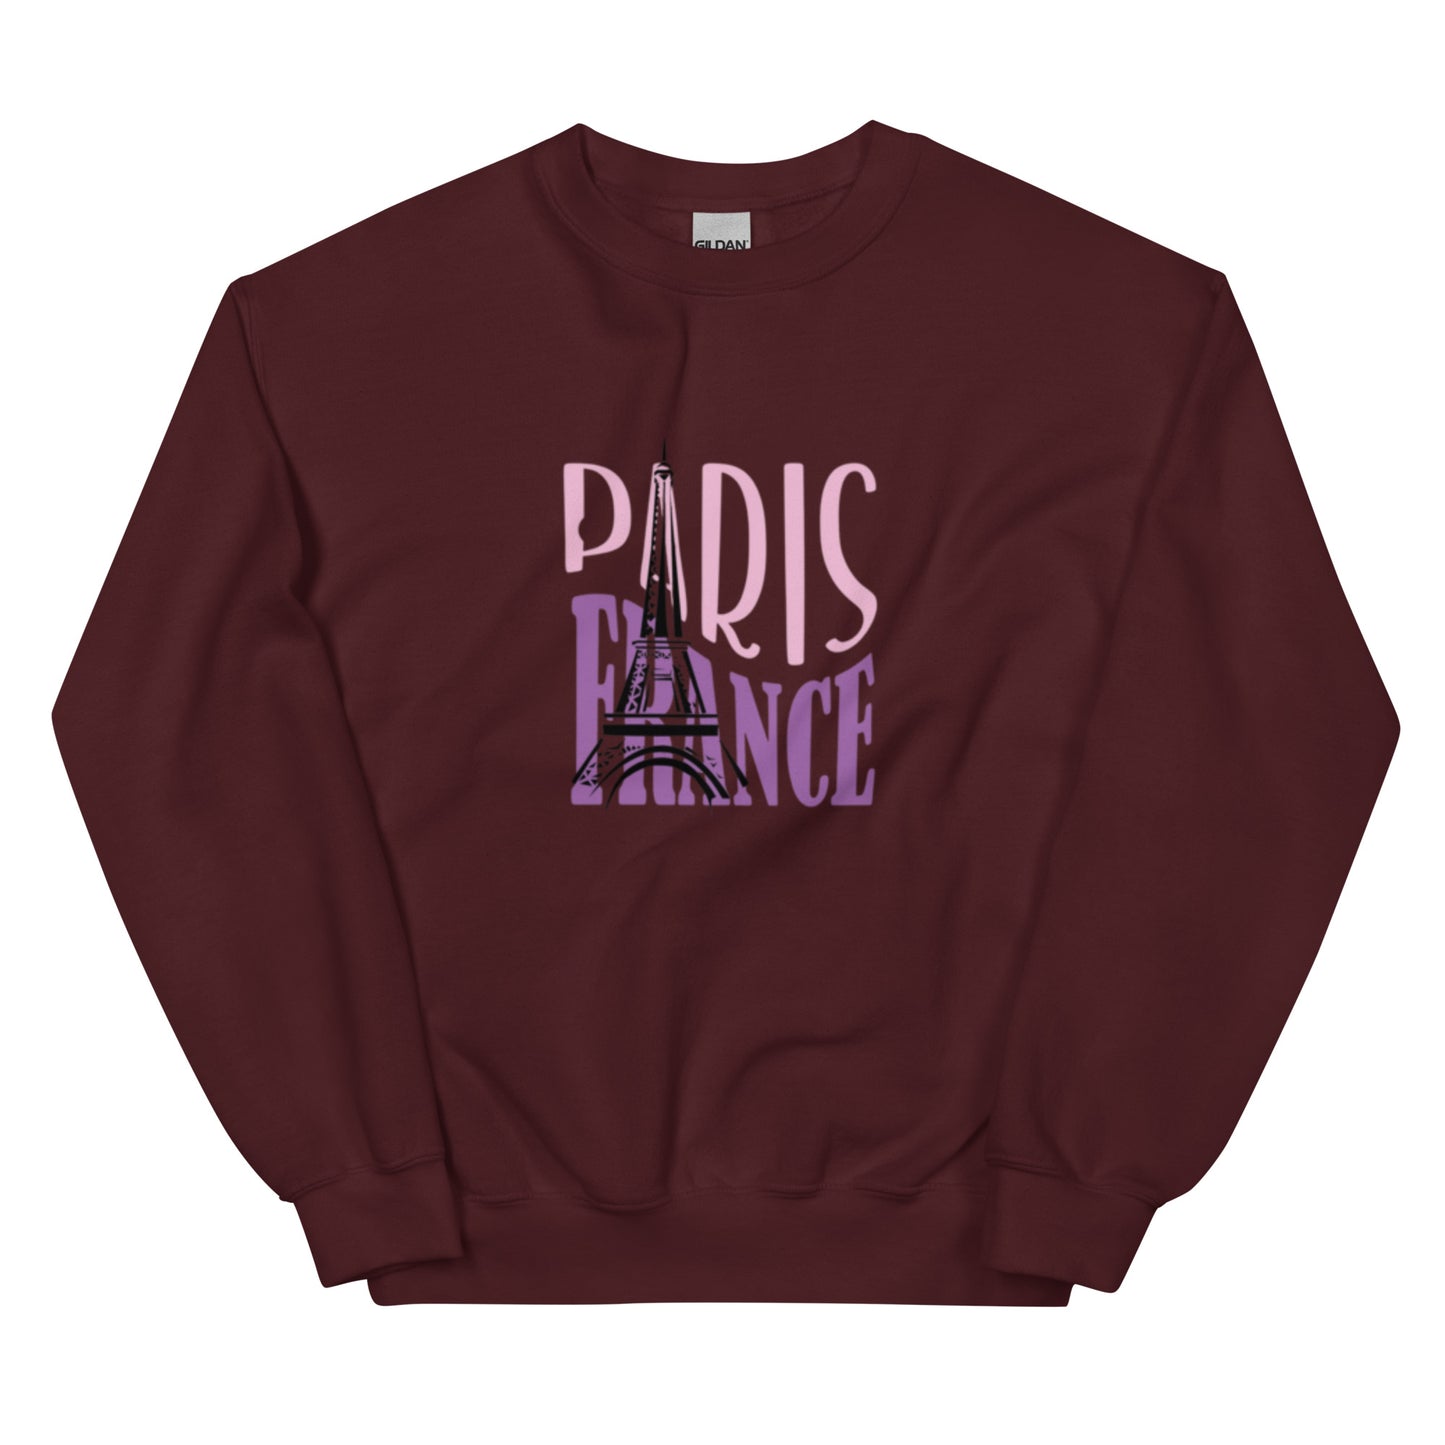 Unisex Sweatshirt Paris France / Eiffel Tower / Perfect Gift for yourself /